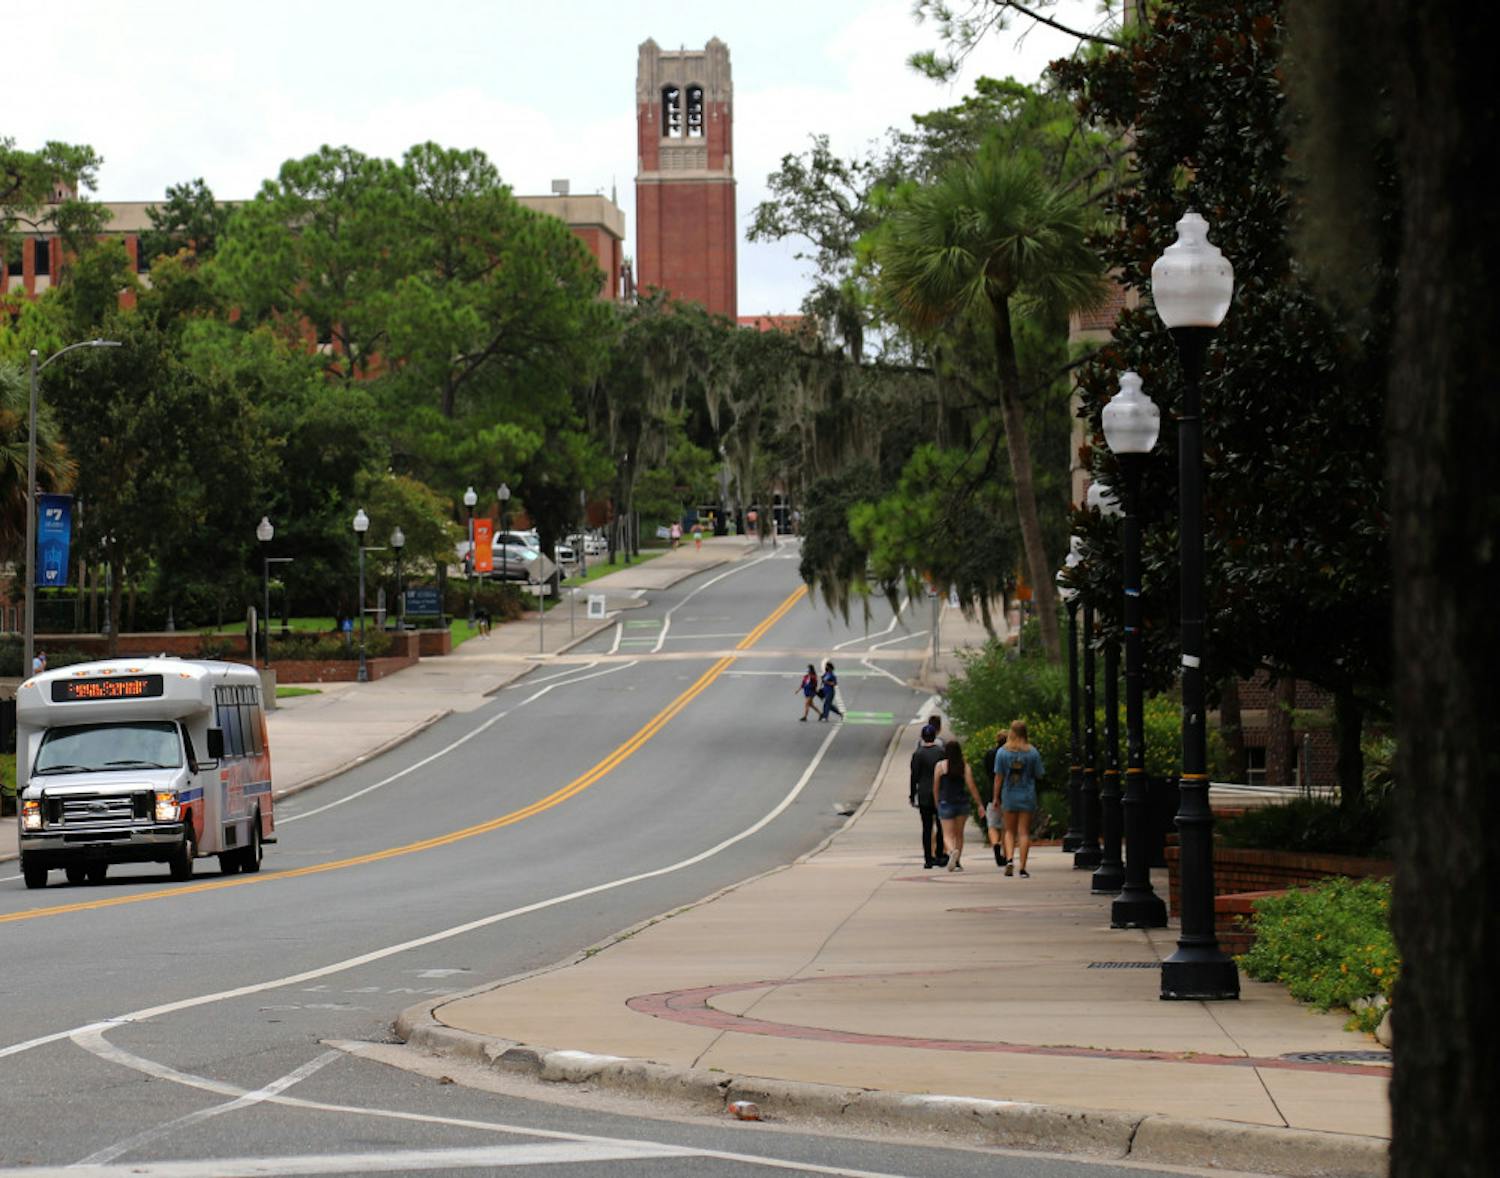 Few students are seen wandering around UF’s campus on August 31, 2020, in Gainesville Fla., due to the social distancing guidelines and mask requirements set in place. However, the Campus Connector and RTS buses still operate with frequent trips across campus. 